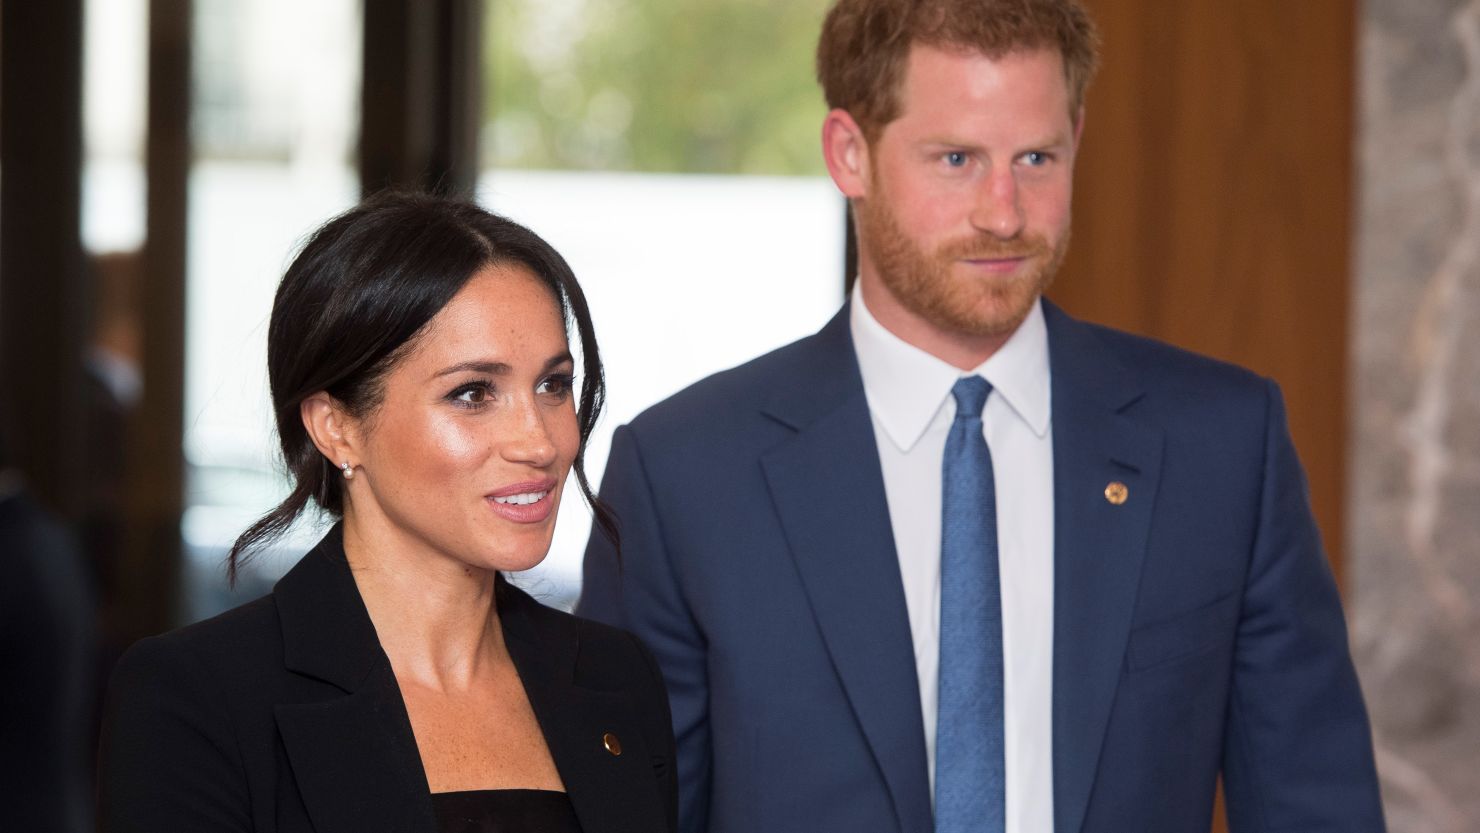 The Duke and Duchess of Sussex attend an event in London on September 4. 